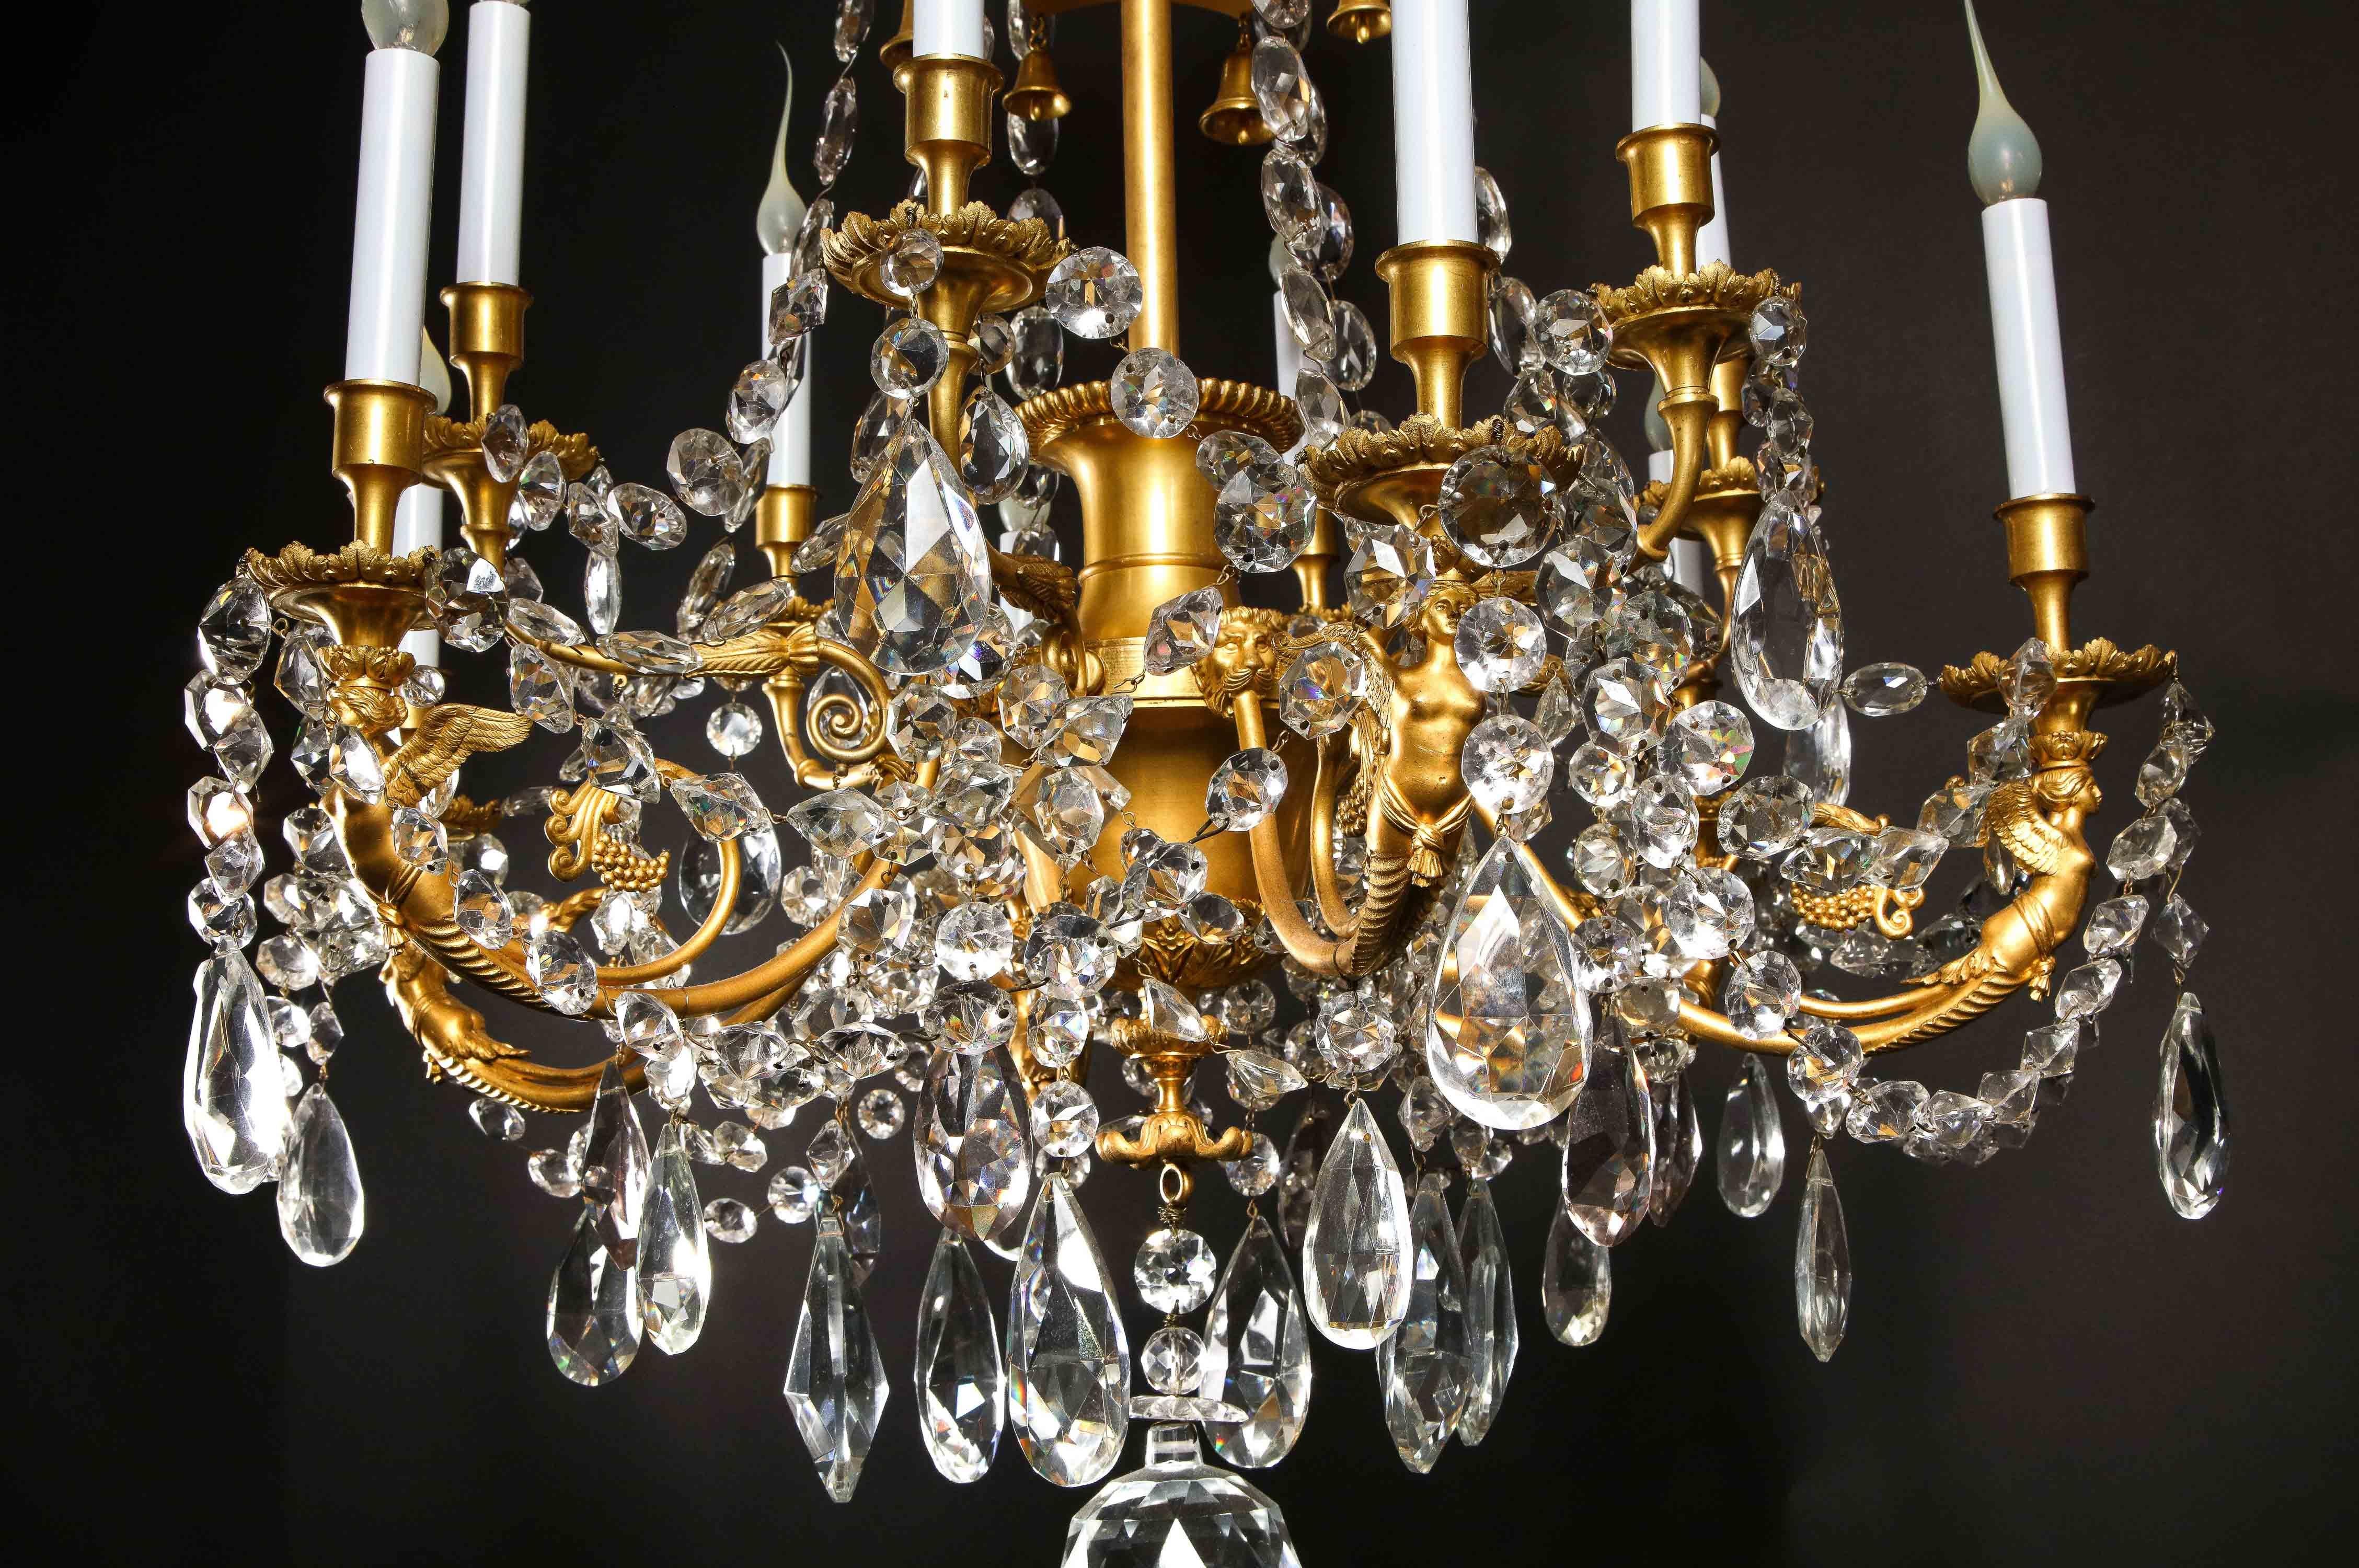 Spectacular Antique French Louis XVI Style Gilt Bronze and Crystal Chandelier For Sale 3